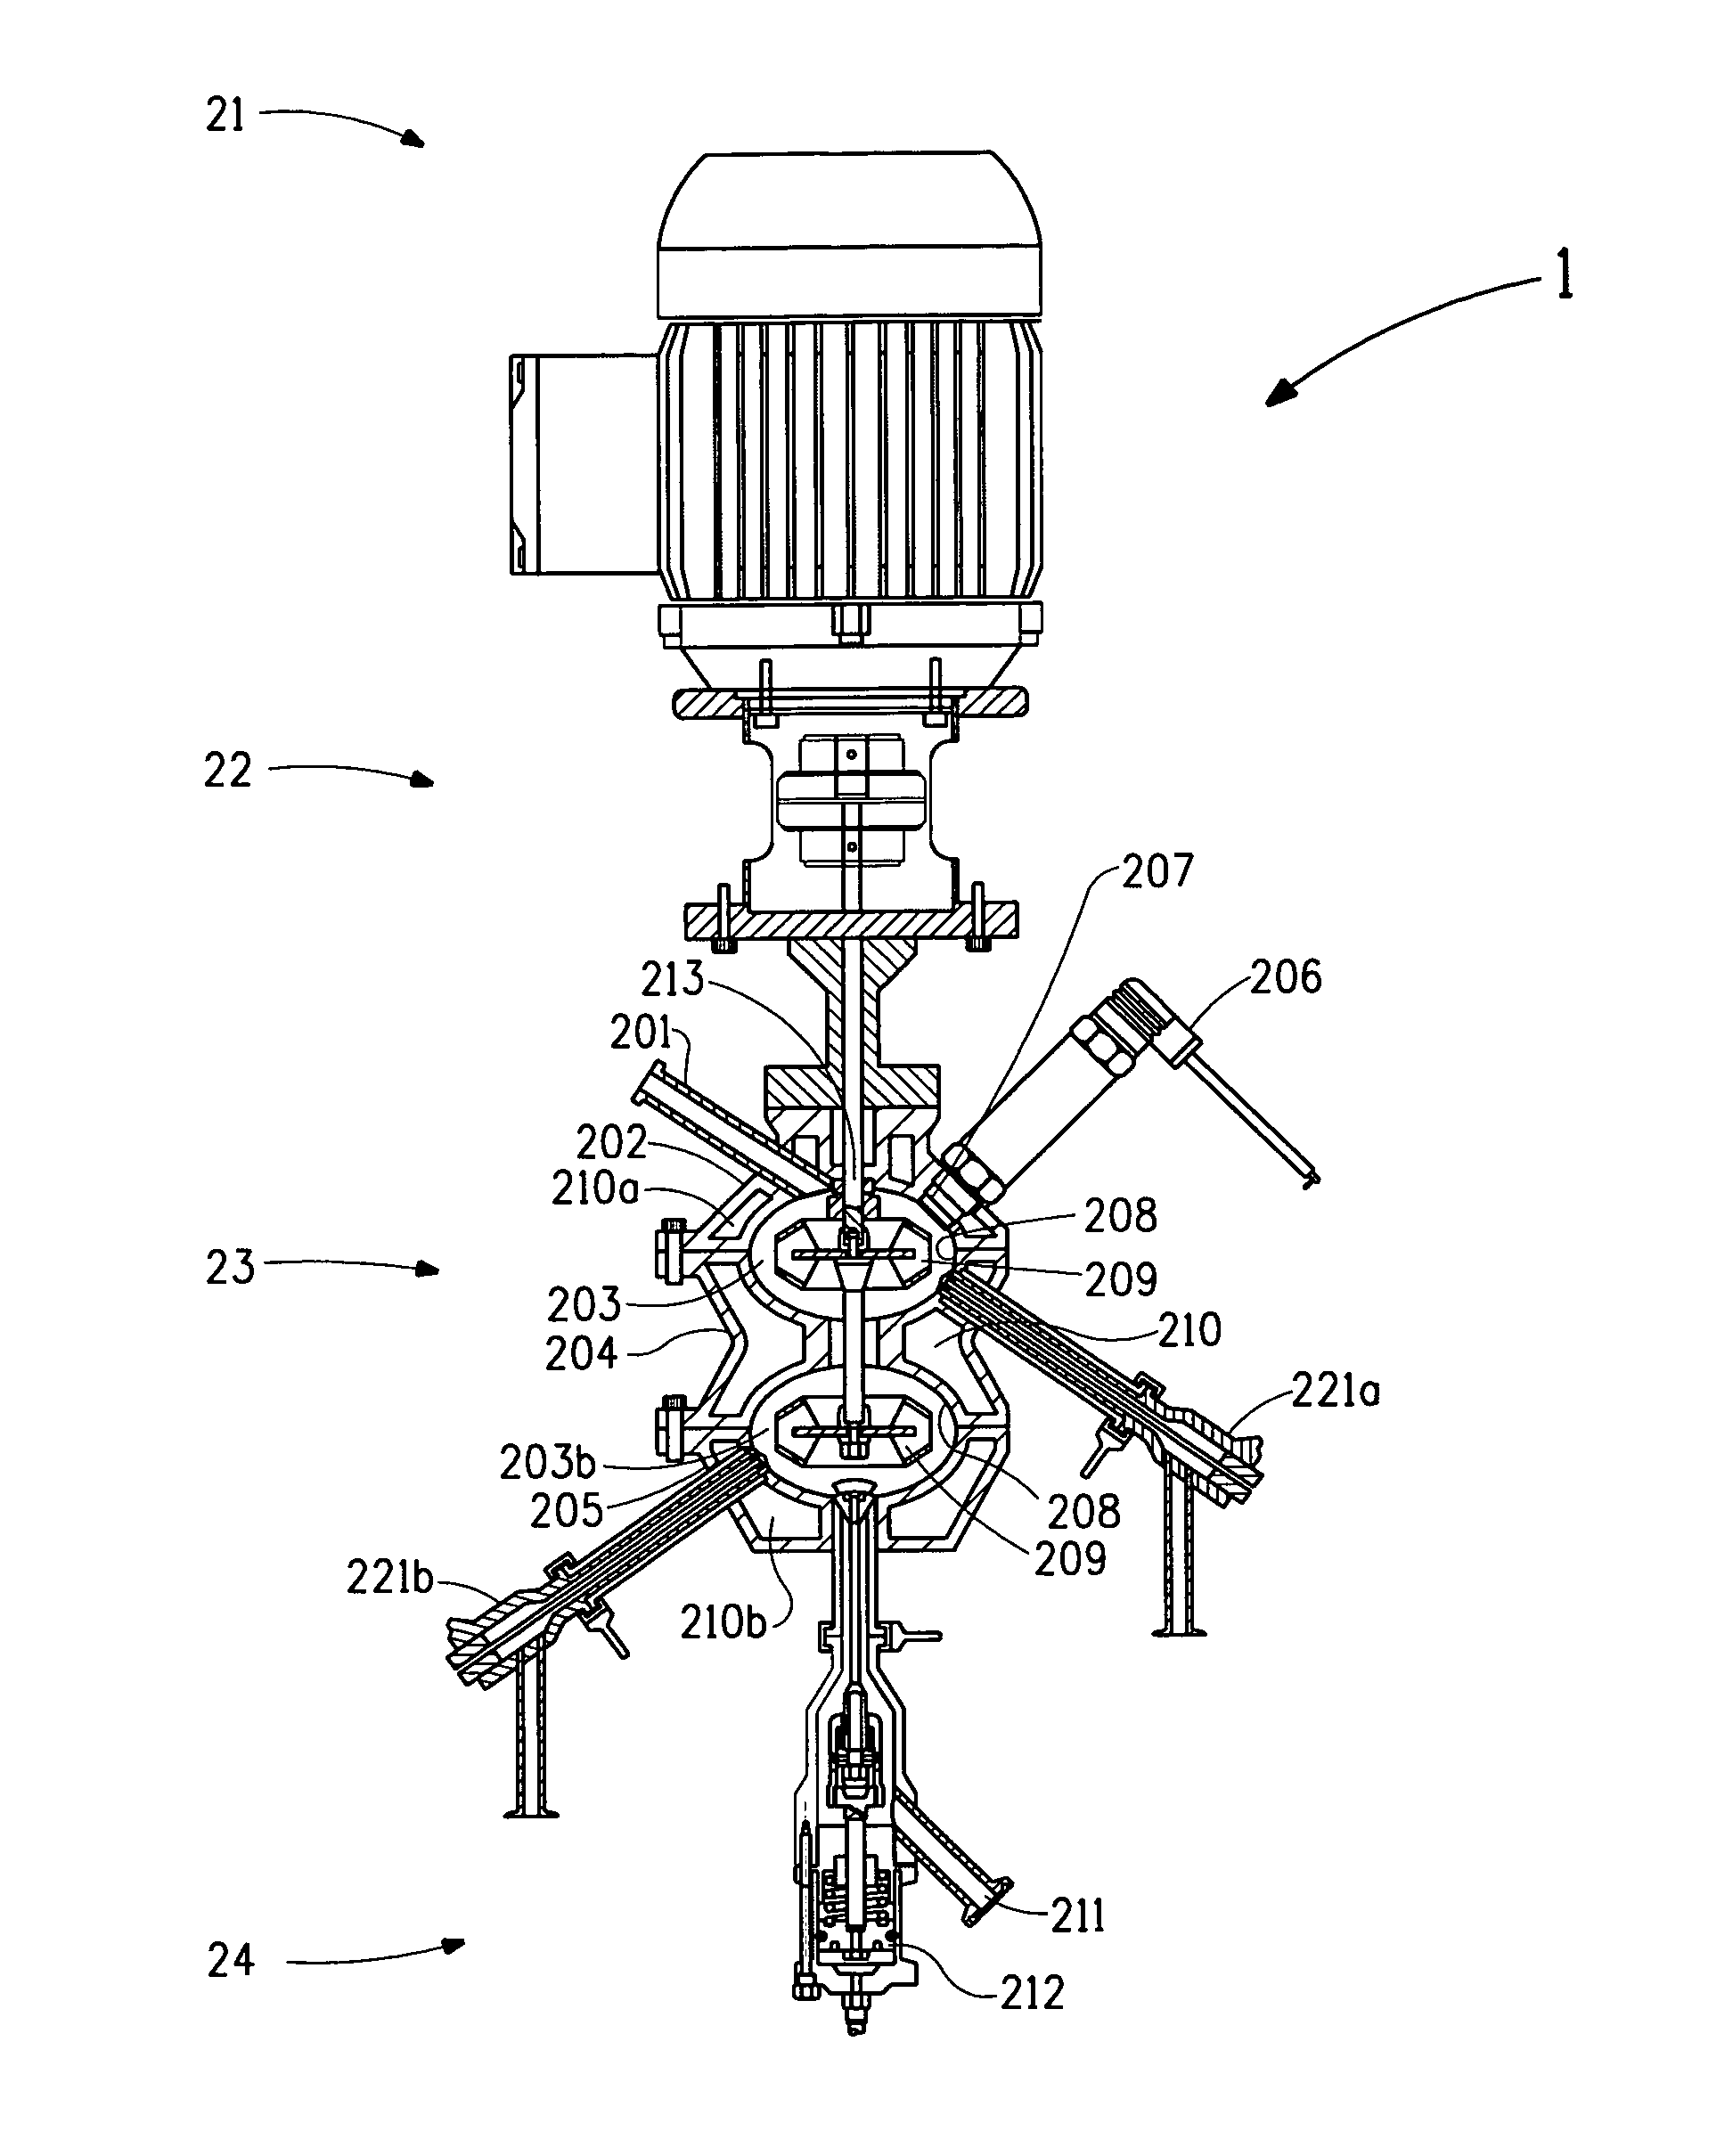 In-line multi-chamber mixer